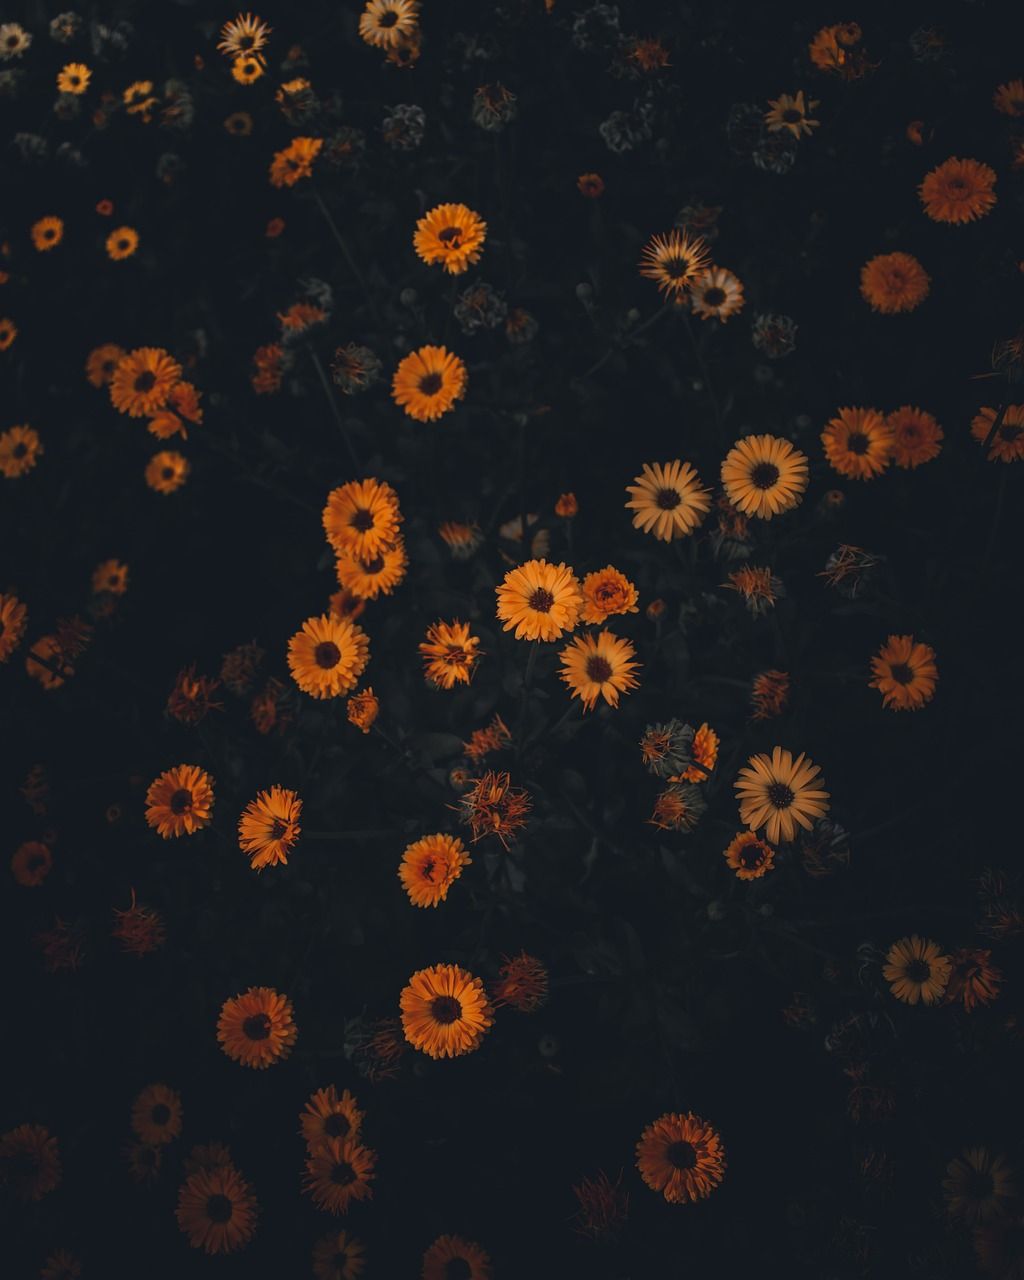 A field of yellow flowers at night - Vintage fall